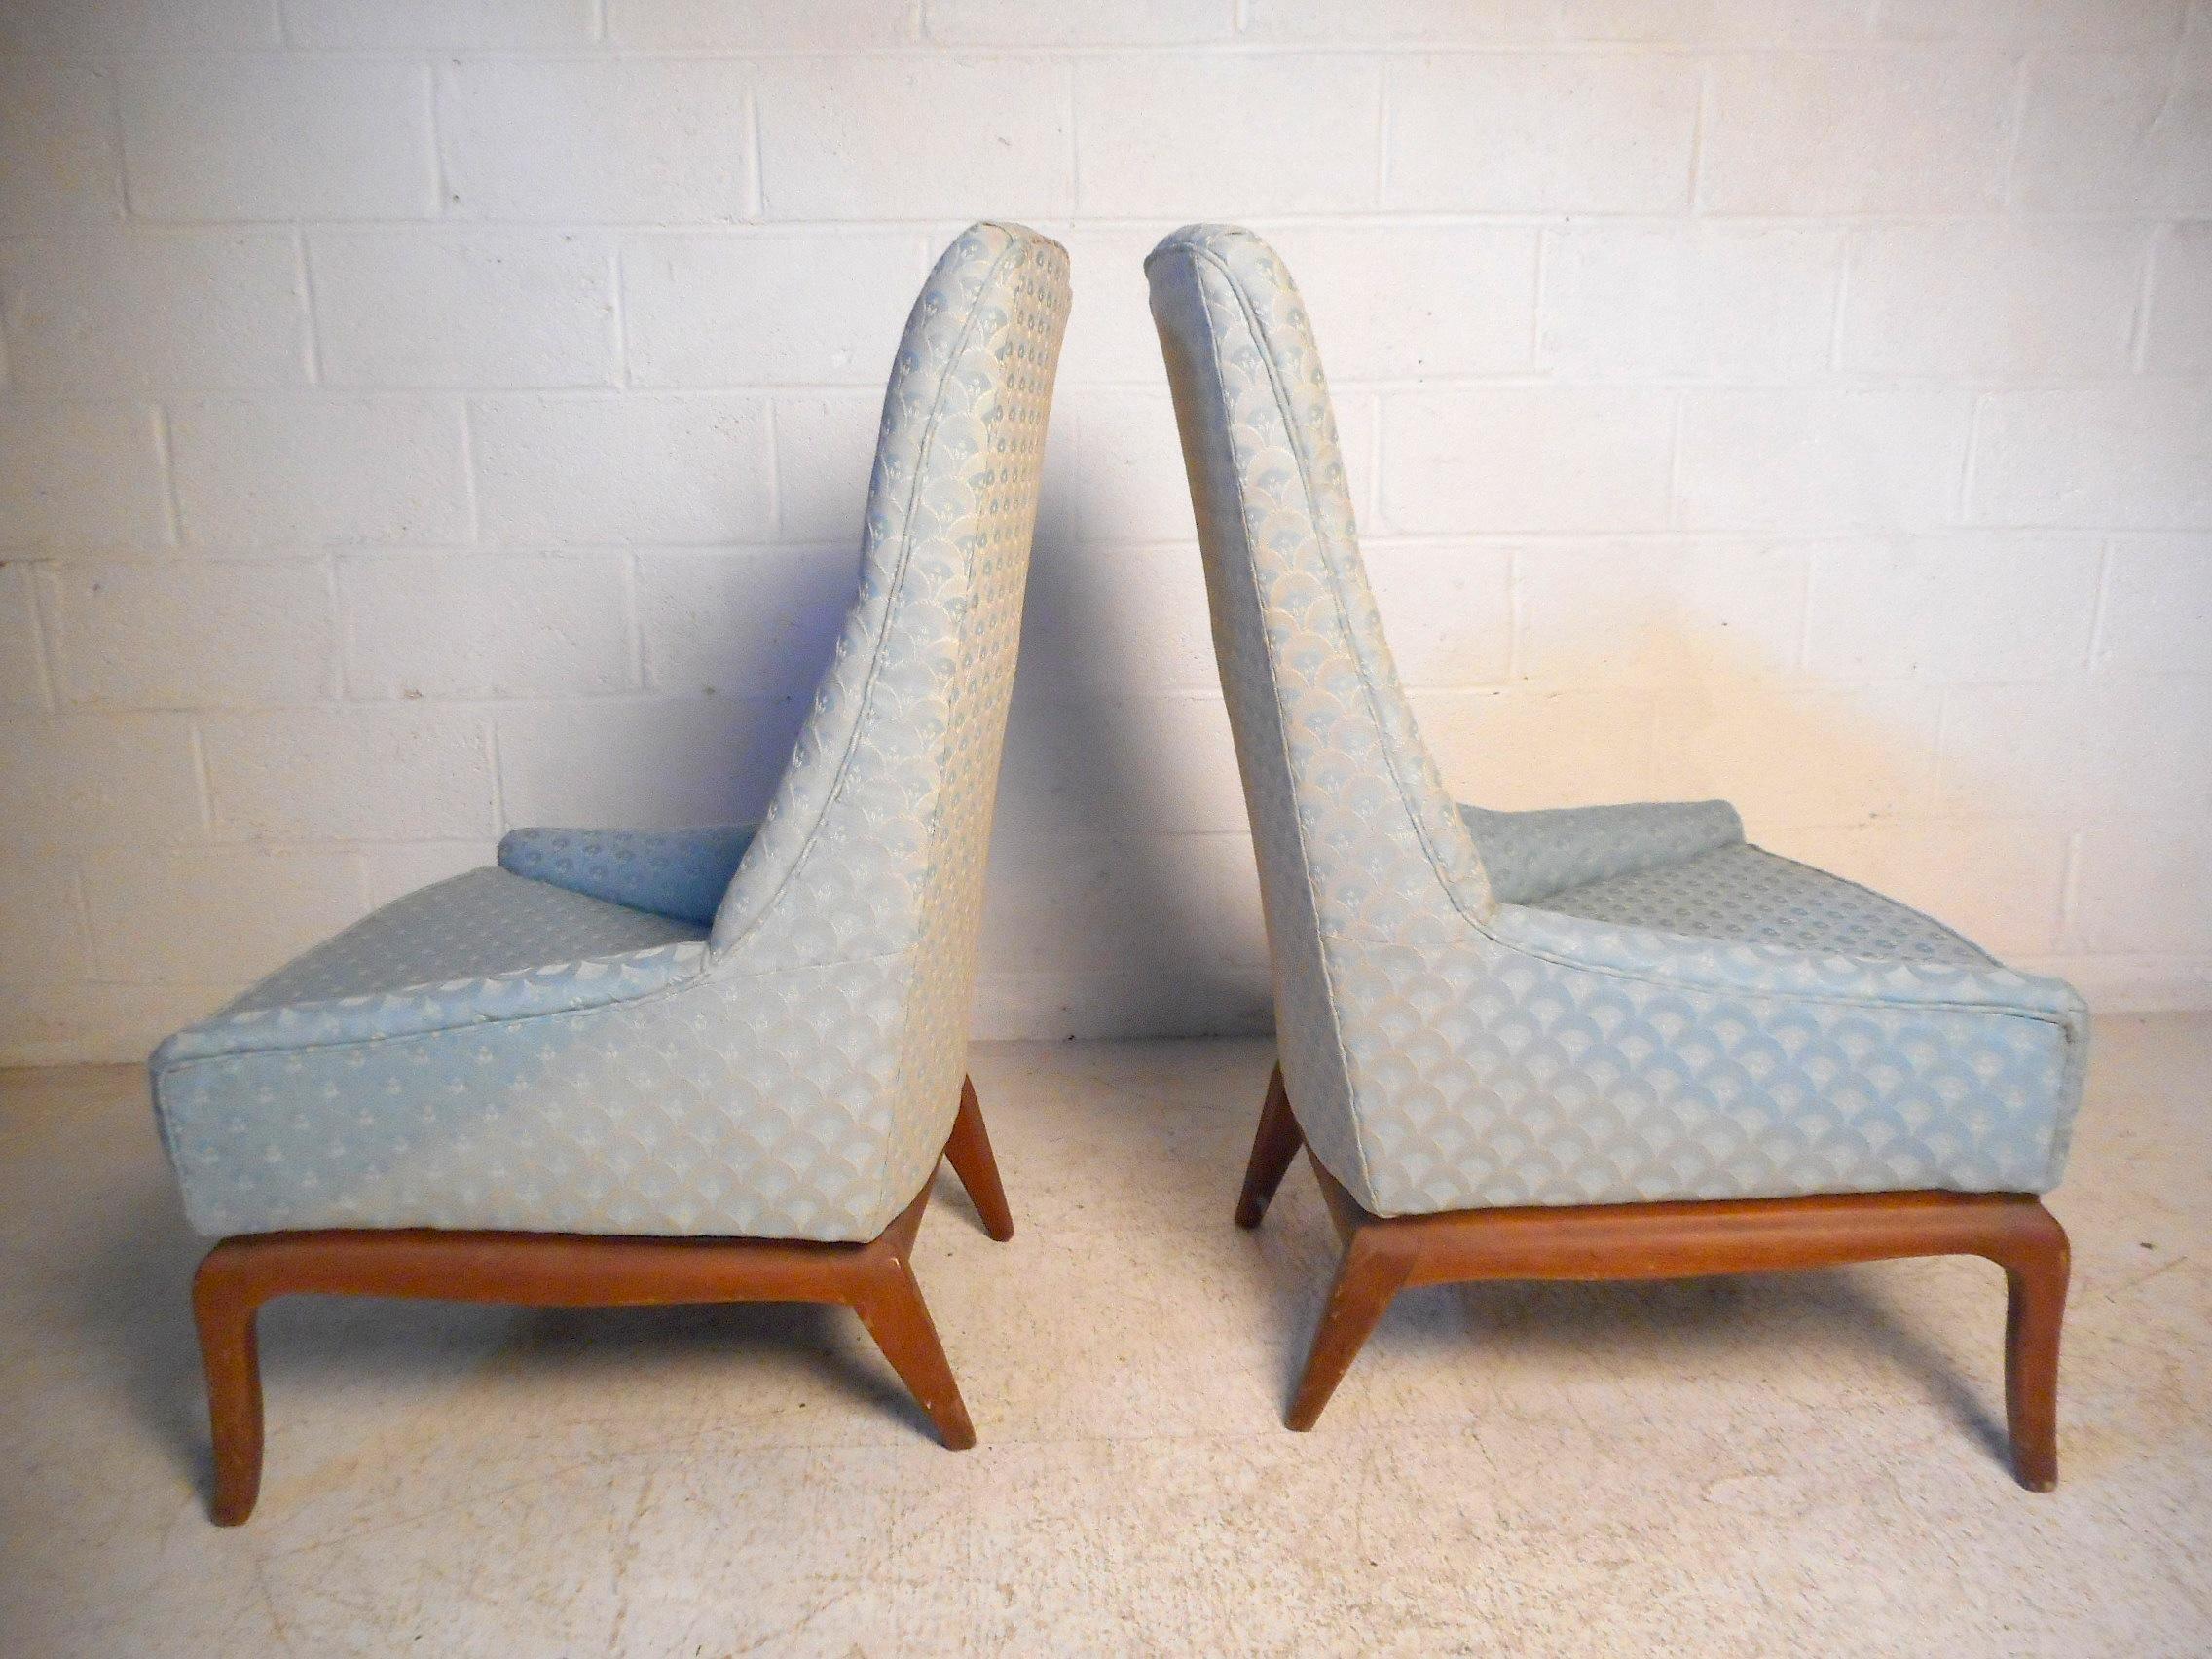 Pair of Midcentury High-Back Chairs after Pearsall In Good Condition For Sale In Brooklyn, NY